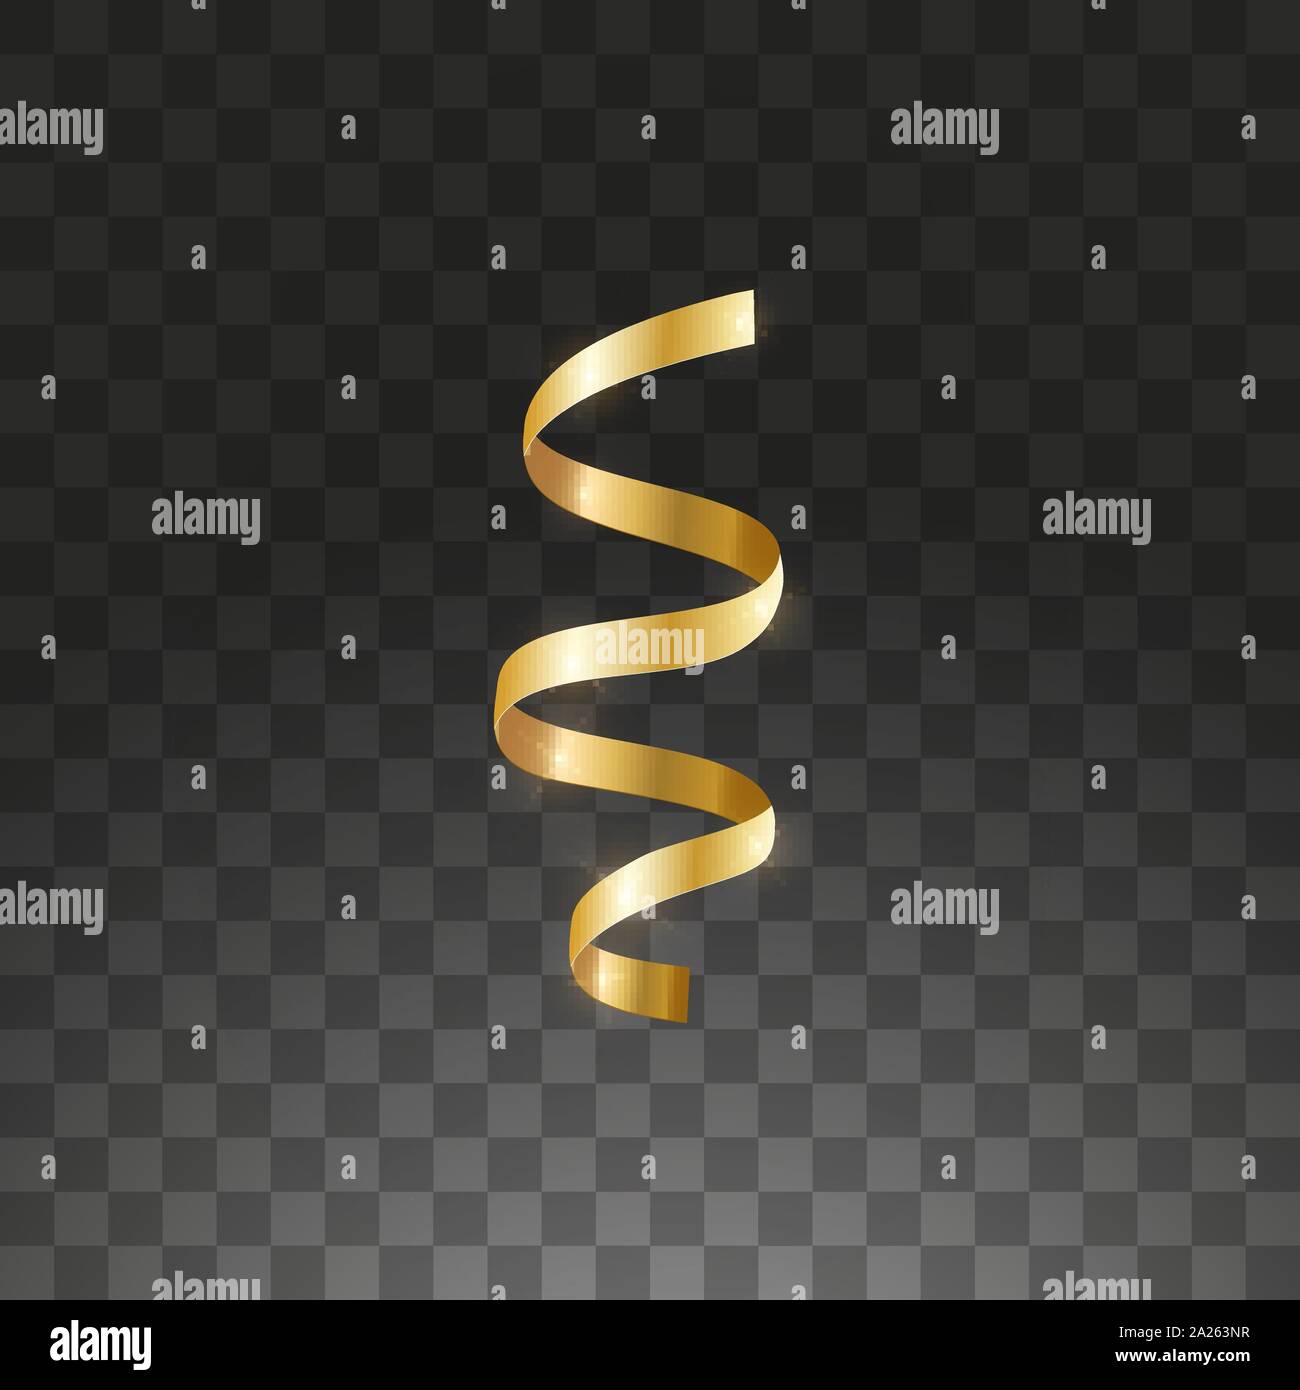 Gold Streamers Serpentine Christmas Party Elements Stock Vector (Royalty  Free) 1169851639